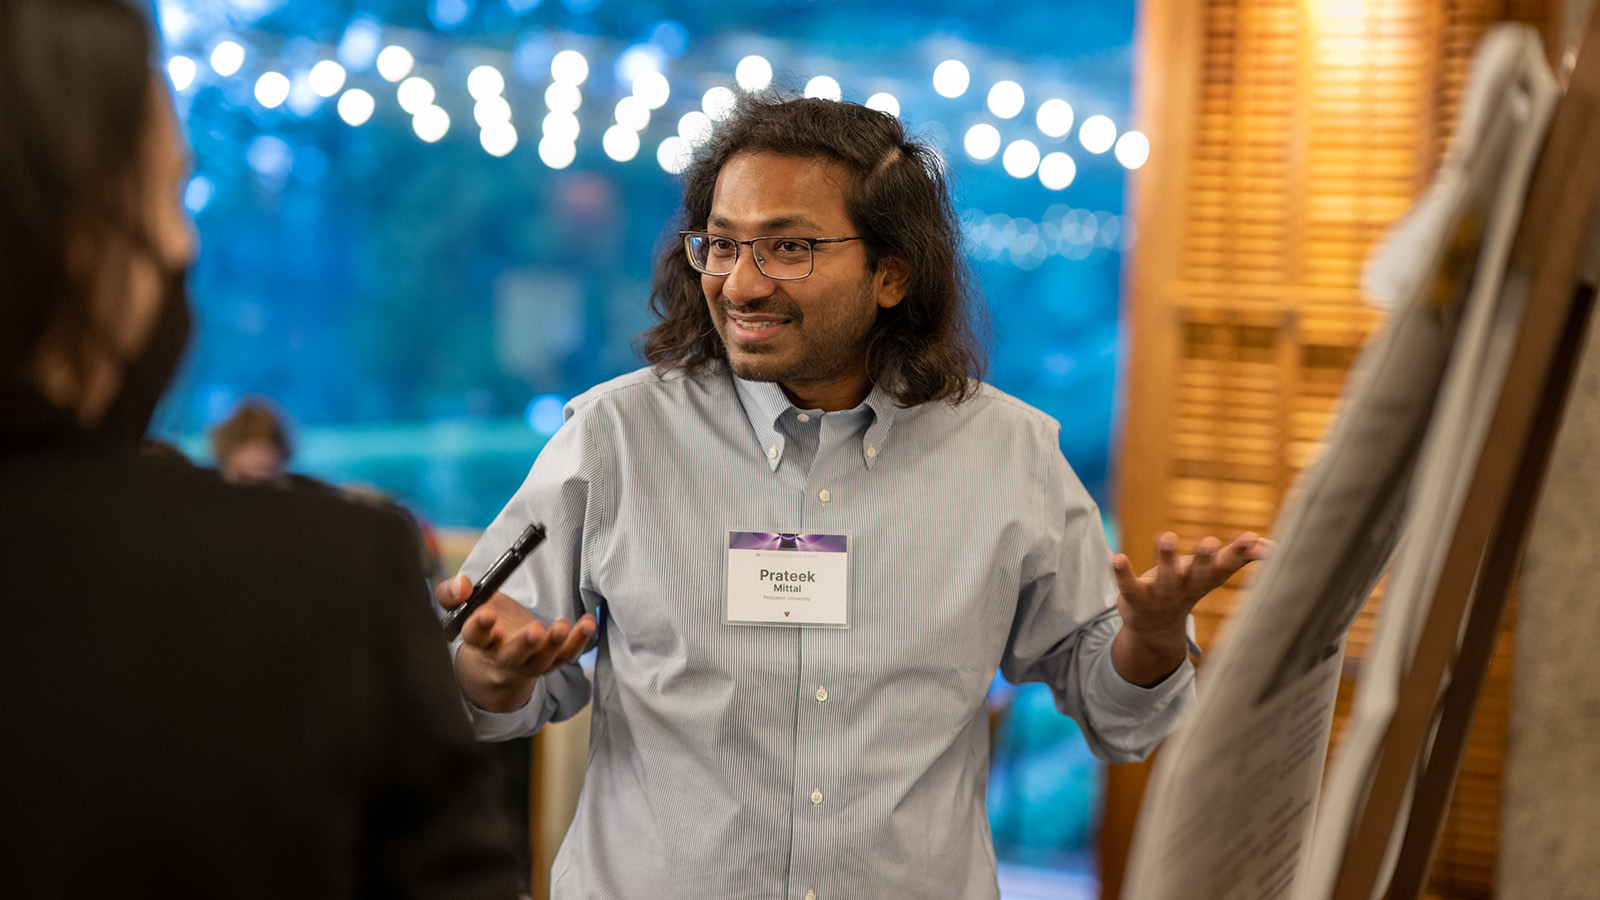 Prateek Mittal talks with colleagues at a conference.